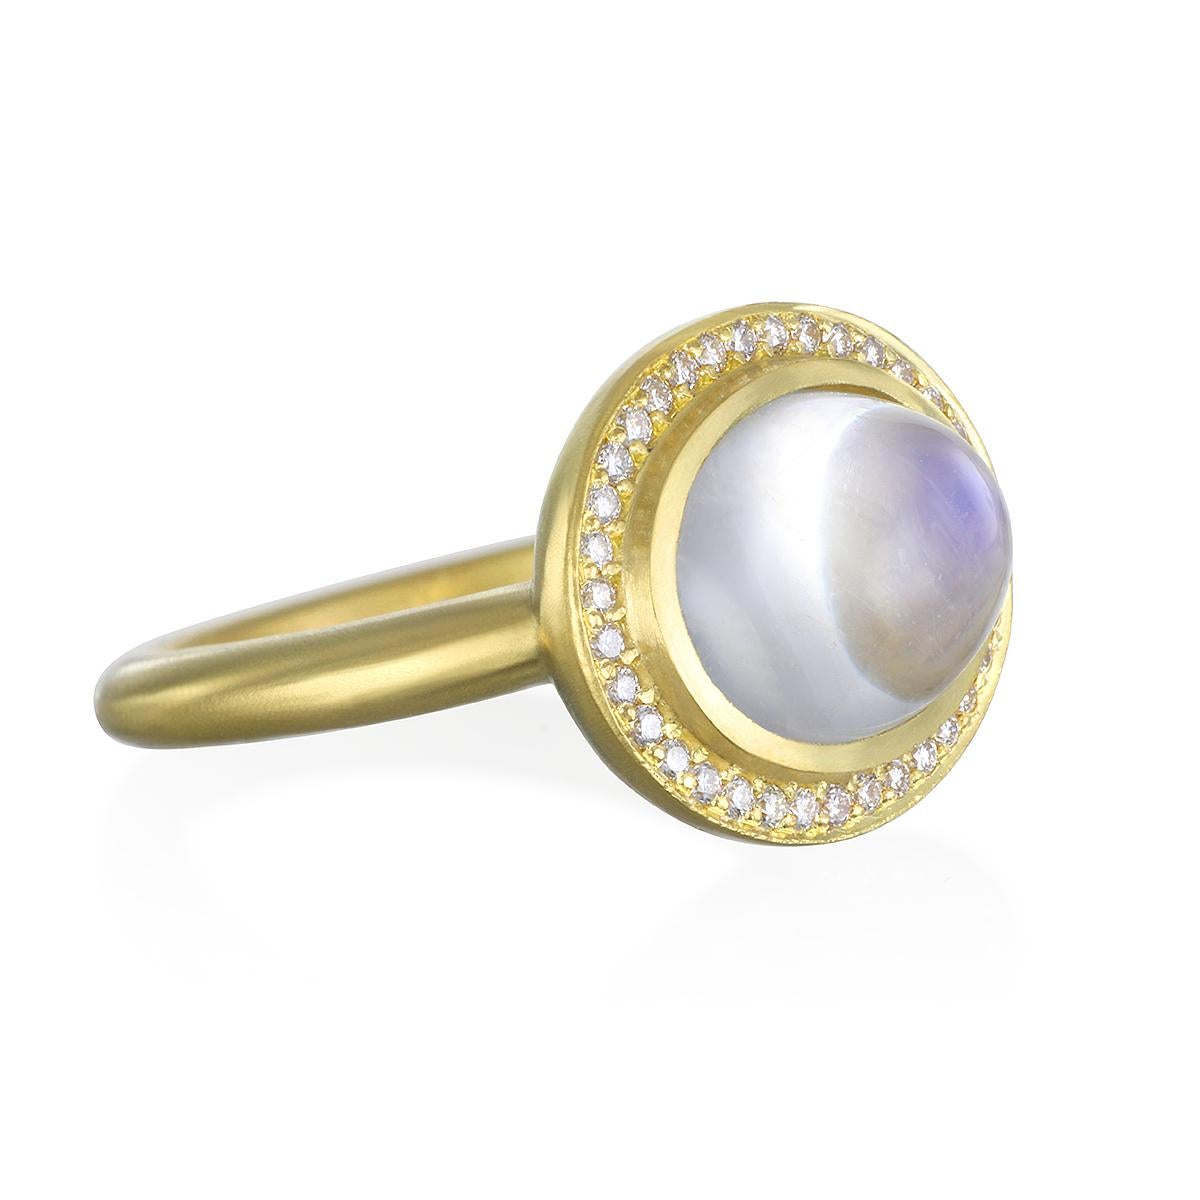 This beautiful Moonstone Bezel Ring is full of light and reflects beautiful translucent blue hues. The shape, polish, and matte gold enhances the moonstones striking rainbow effect. Complete with a Diamond halo for extra sparkle.

Handcrafted in 18k